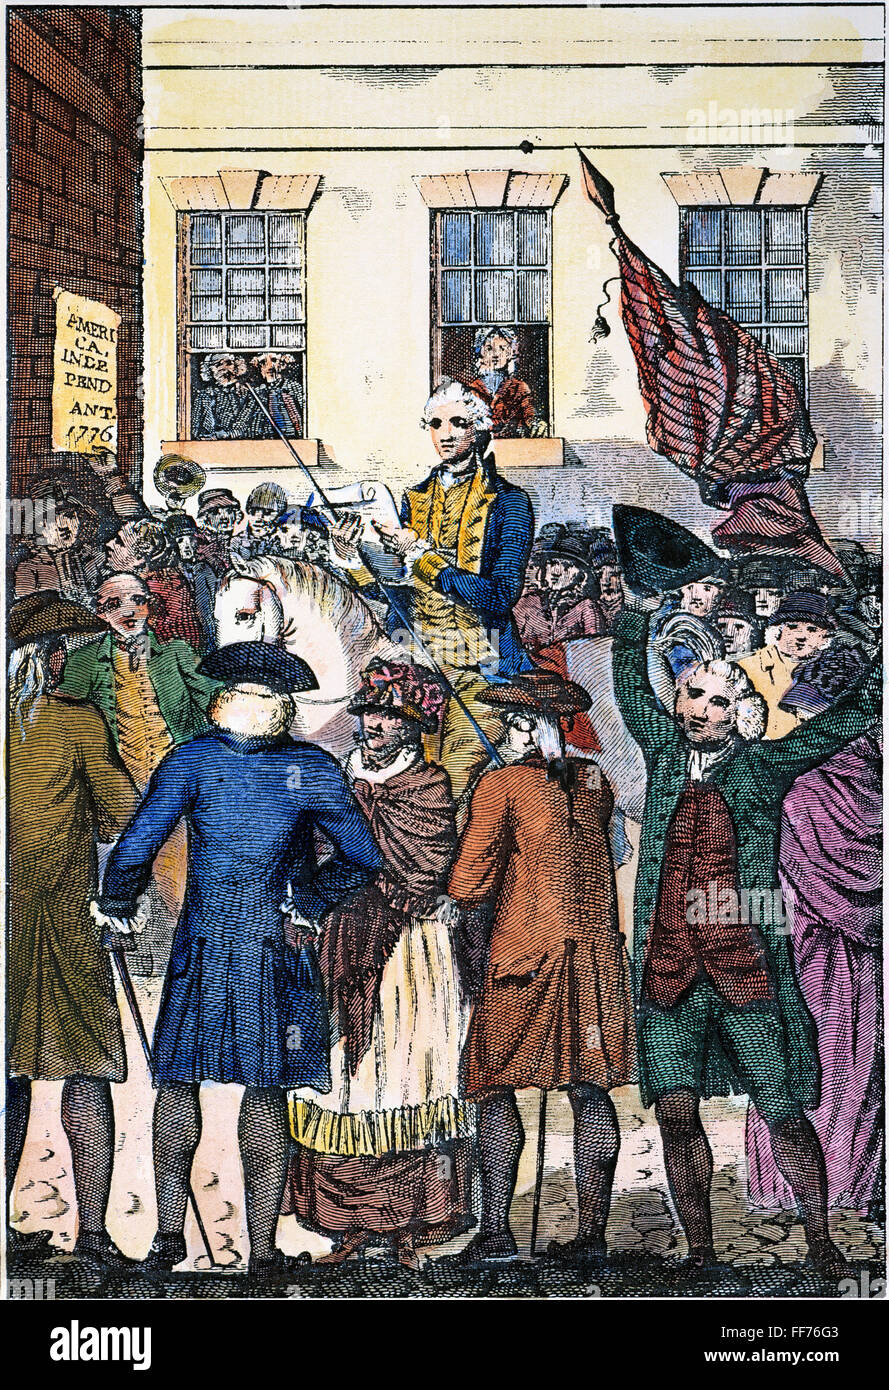 PHILADELPHIA, 1776. /nColonel John Nixon making the first public reading of the Declaration of Independence in the State House Yard, Philadelphia, Pennsylvania, on 8 July 1776. Color English line engraving, 1783. Stock Photo